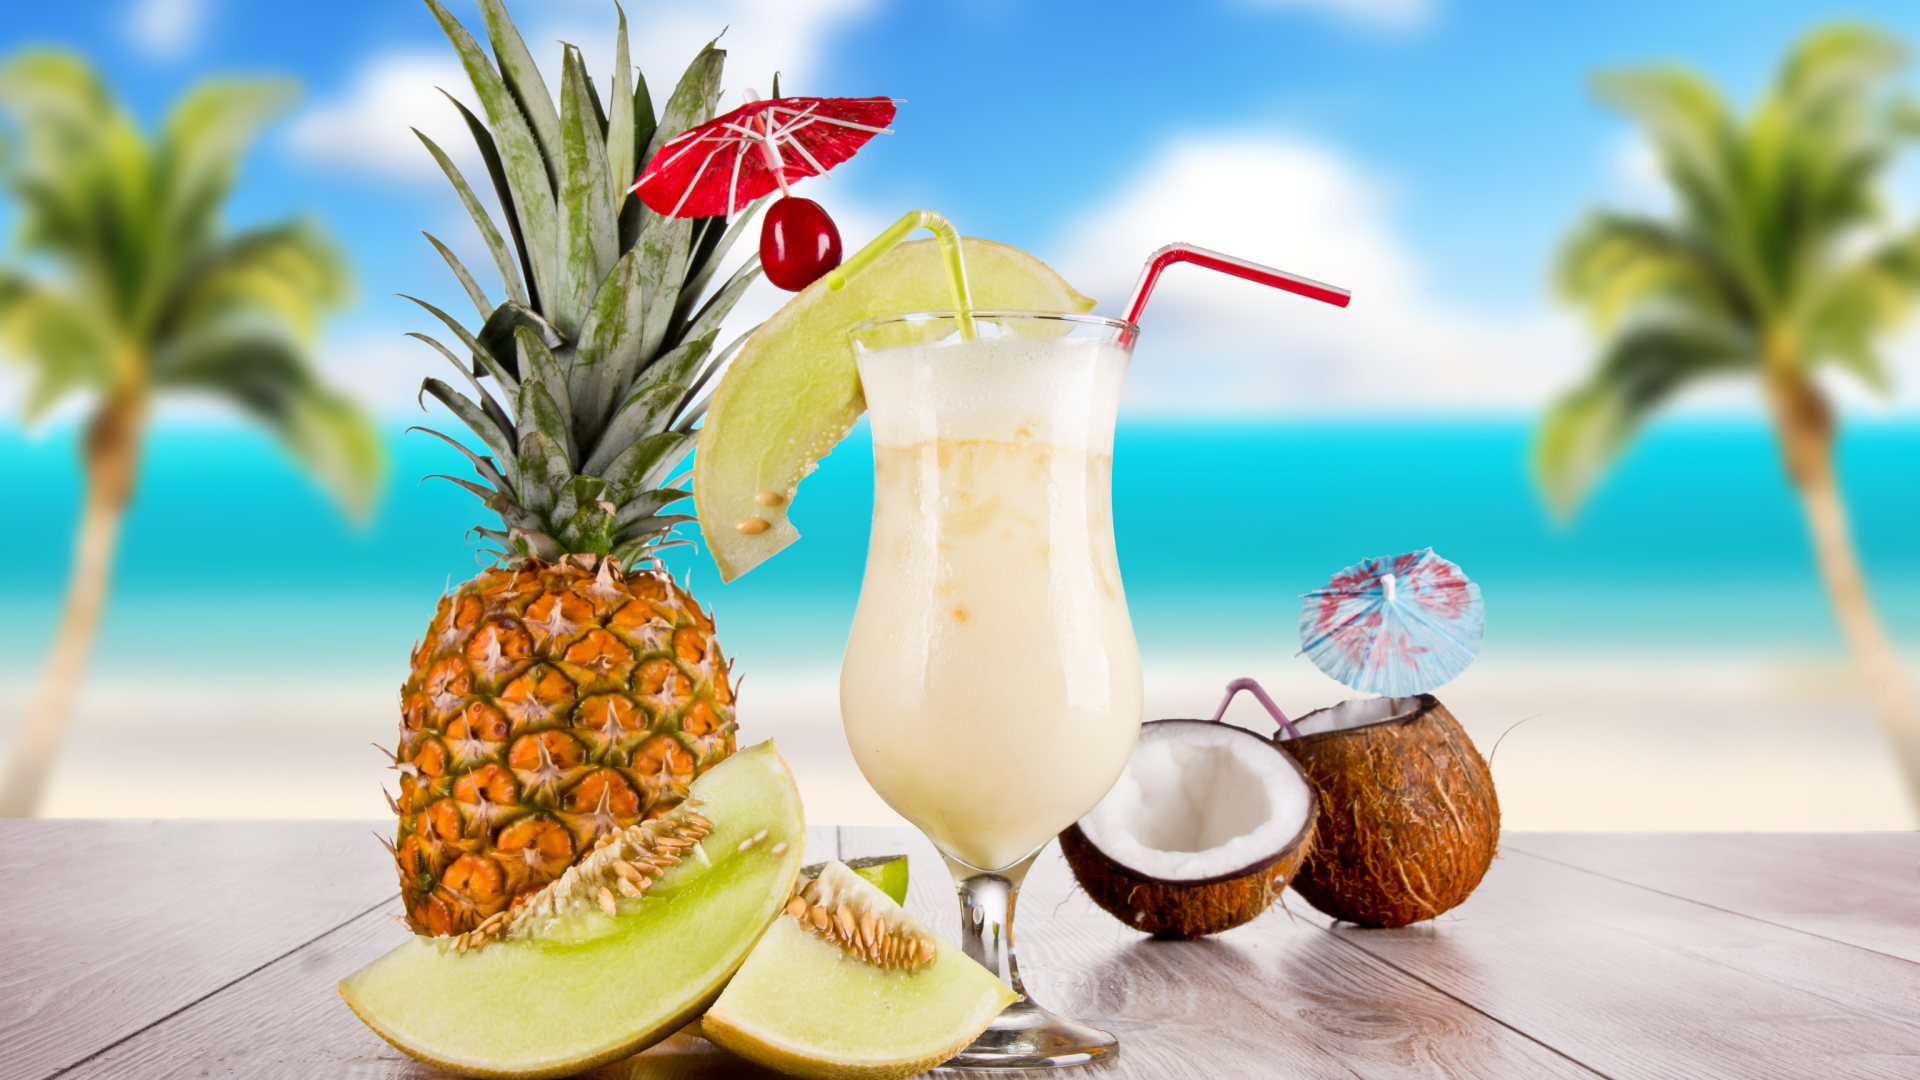 Coconut and Pineapple Cocktails screenshot #1 1920x1080